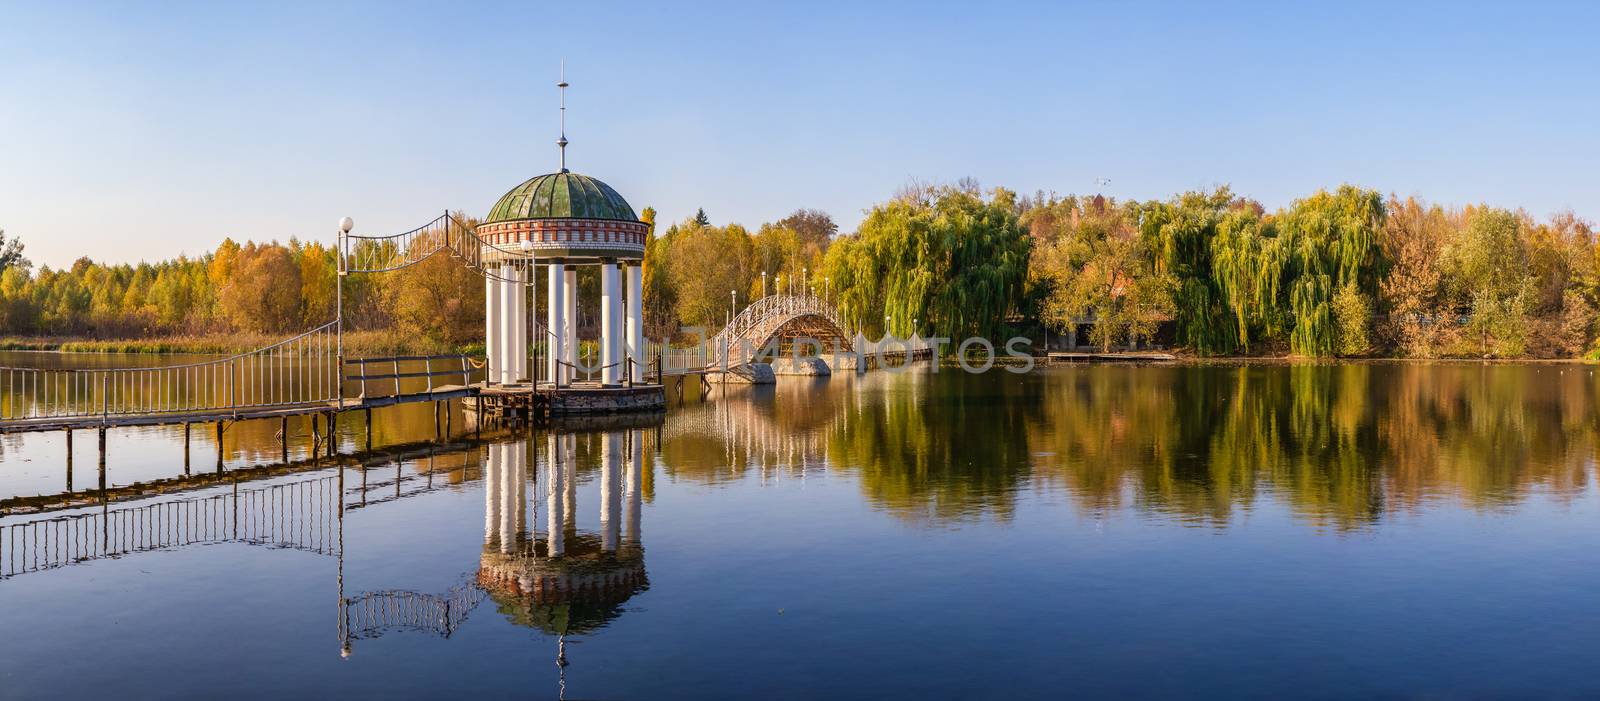 Gazebo in the middle of the lake at fall by Multipedia